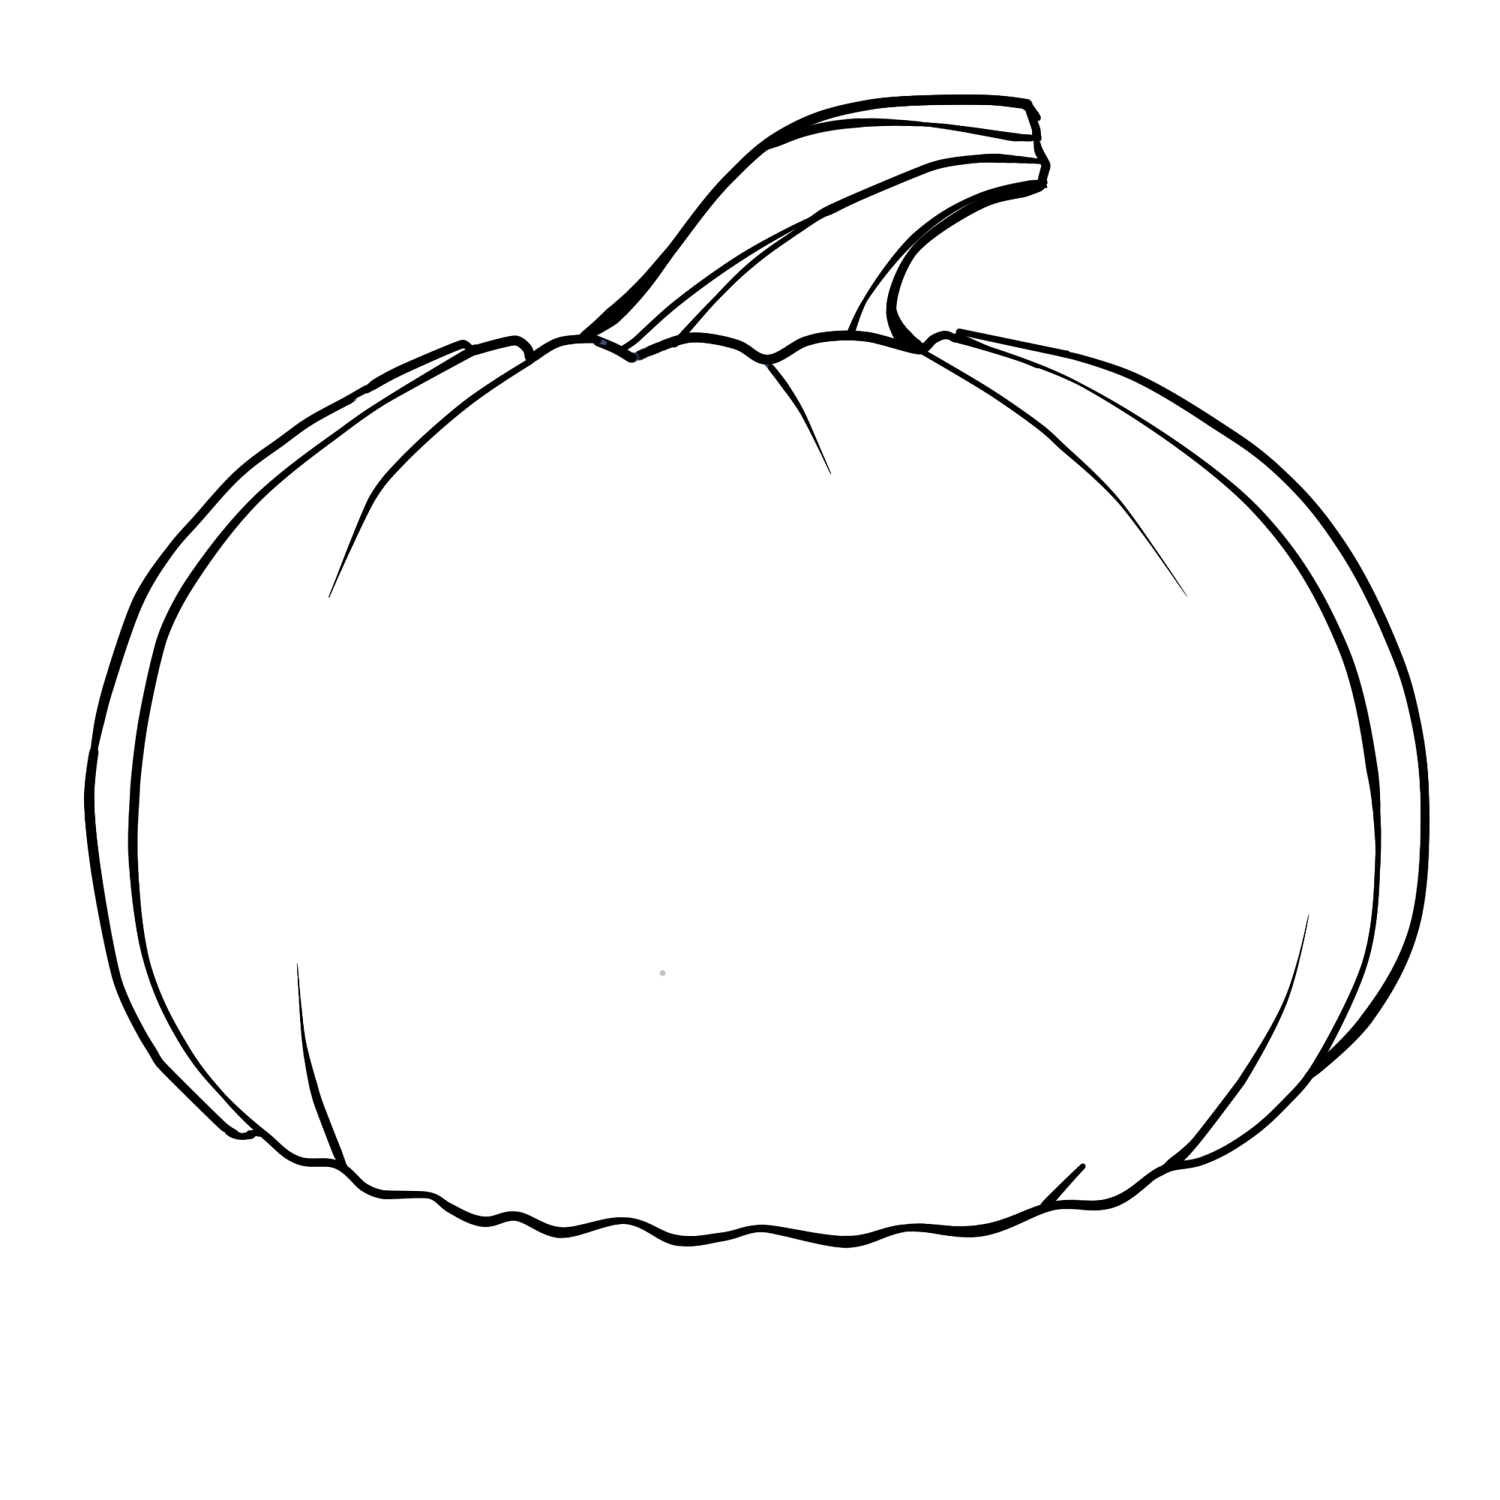 Pumpkin Outline Drawing | Clipart Panda - Free Clipart Images